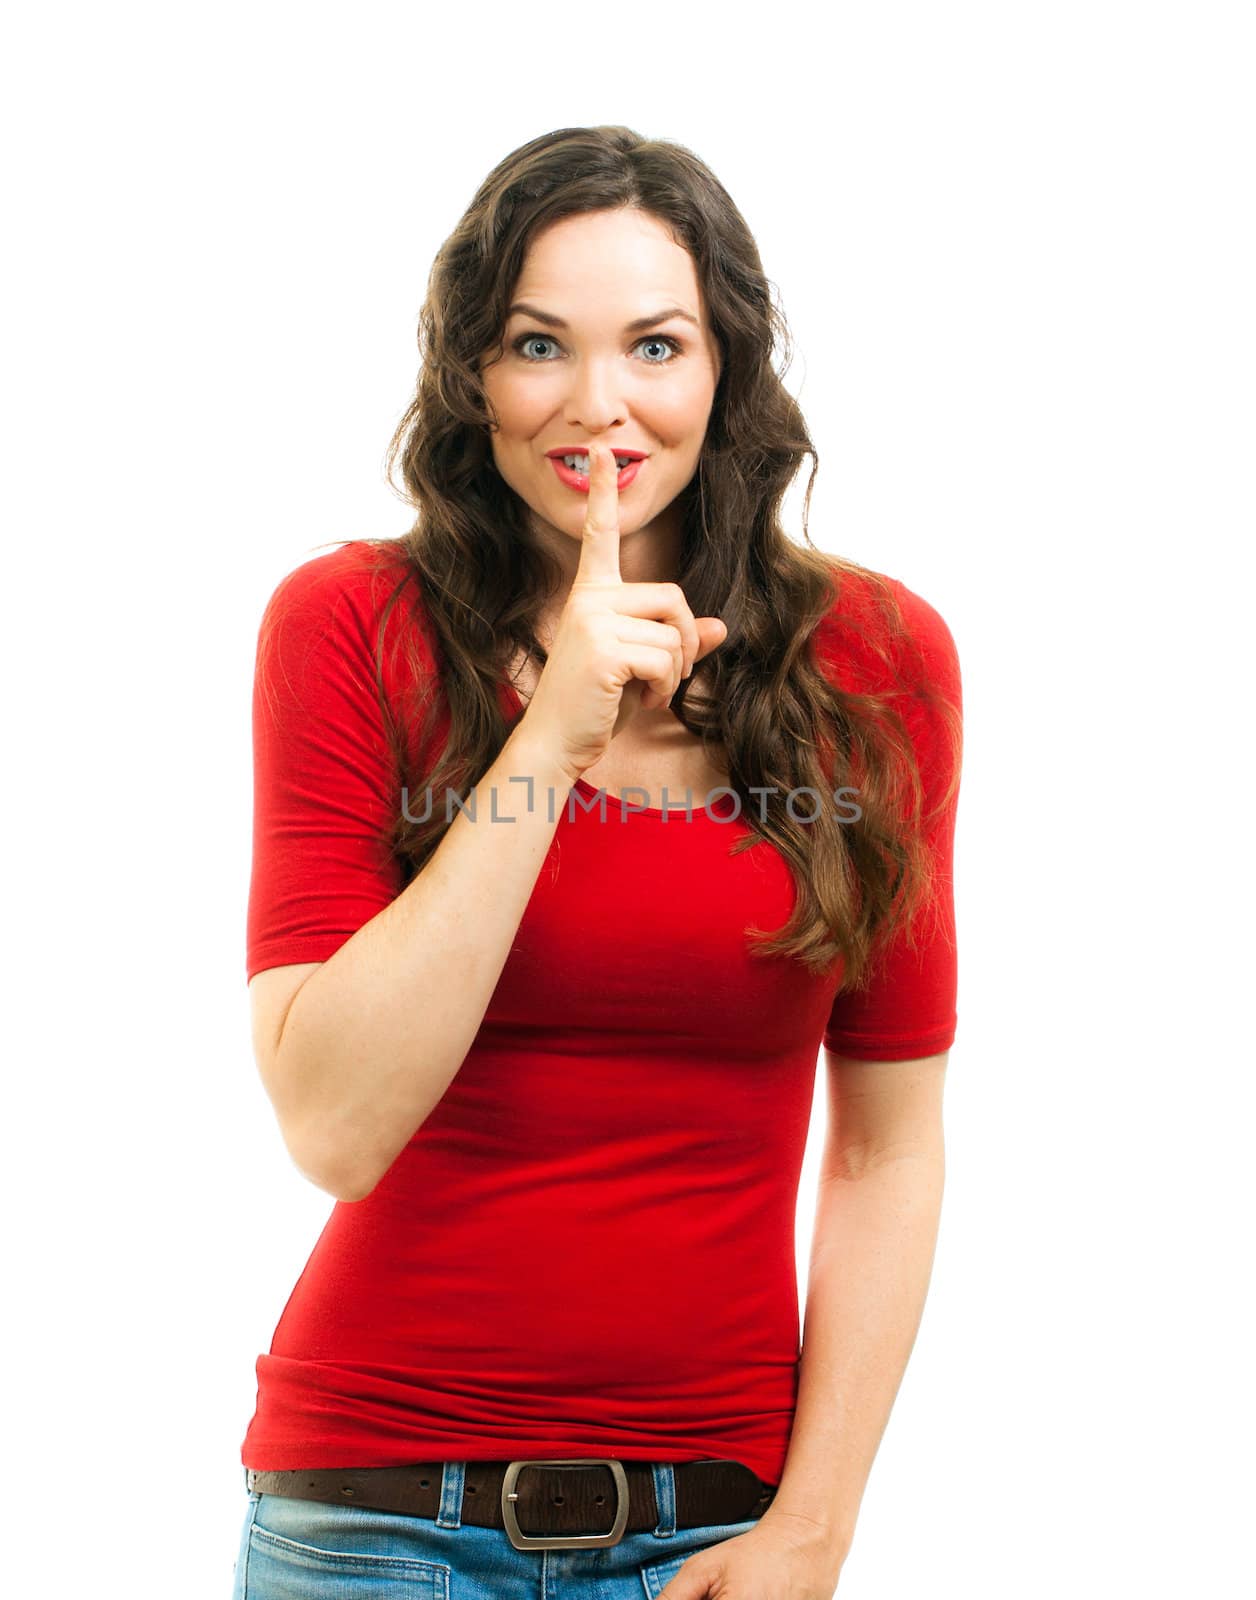 Smiling woman dressed in red doing a silence sign by Jaykayl